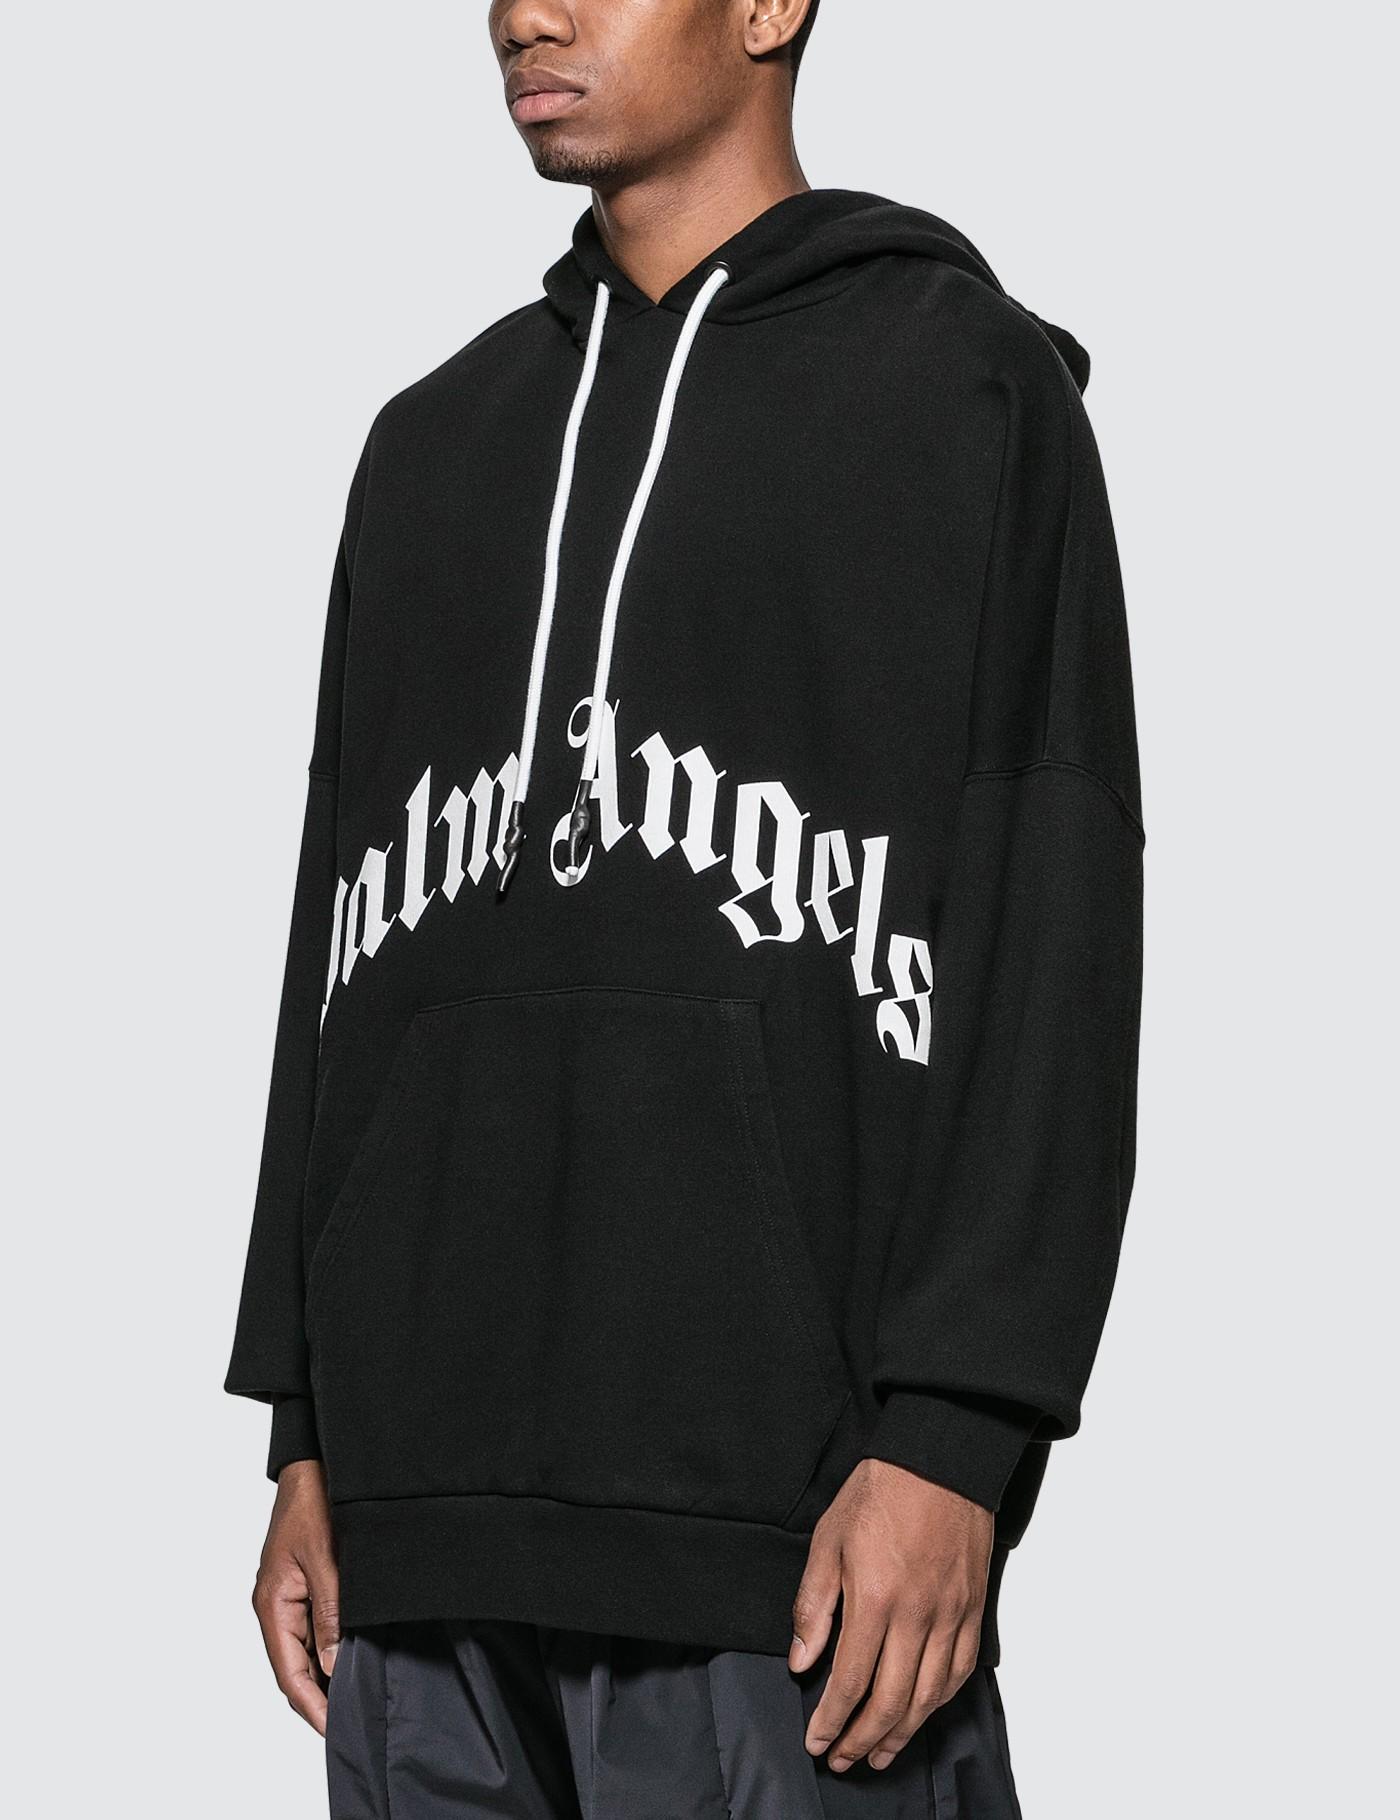 Palm Angels Cotton Thinking Skull Hoodie in Black for Men - Lyst